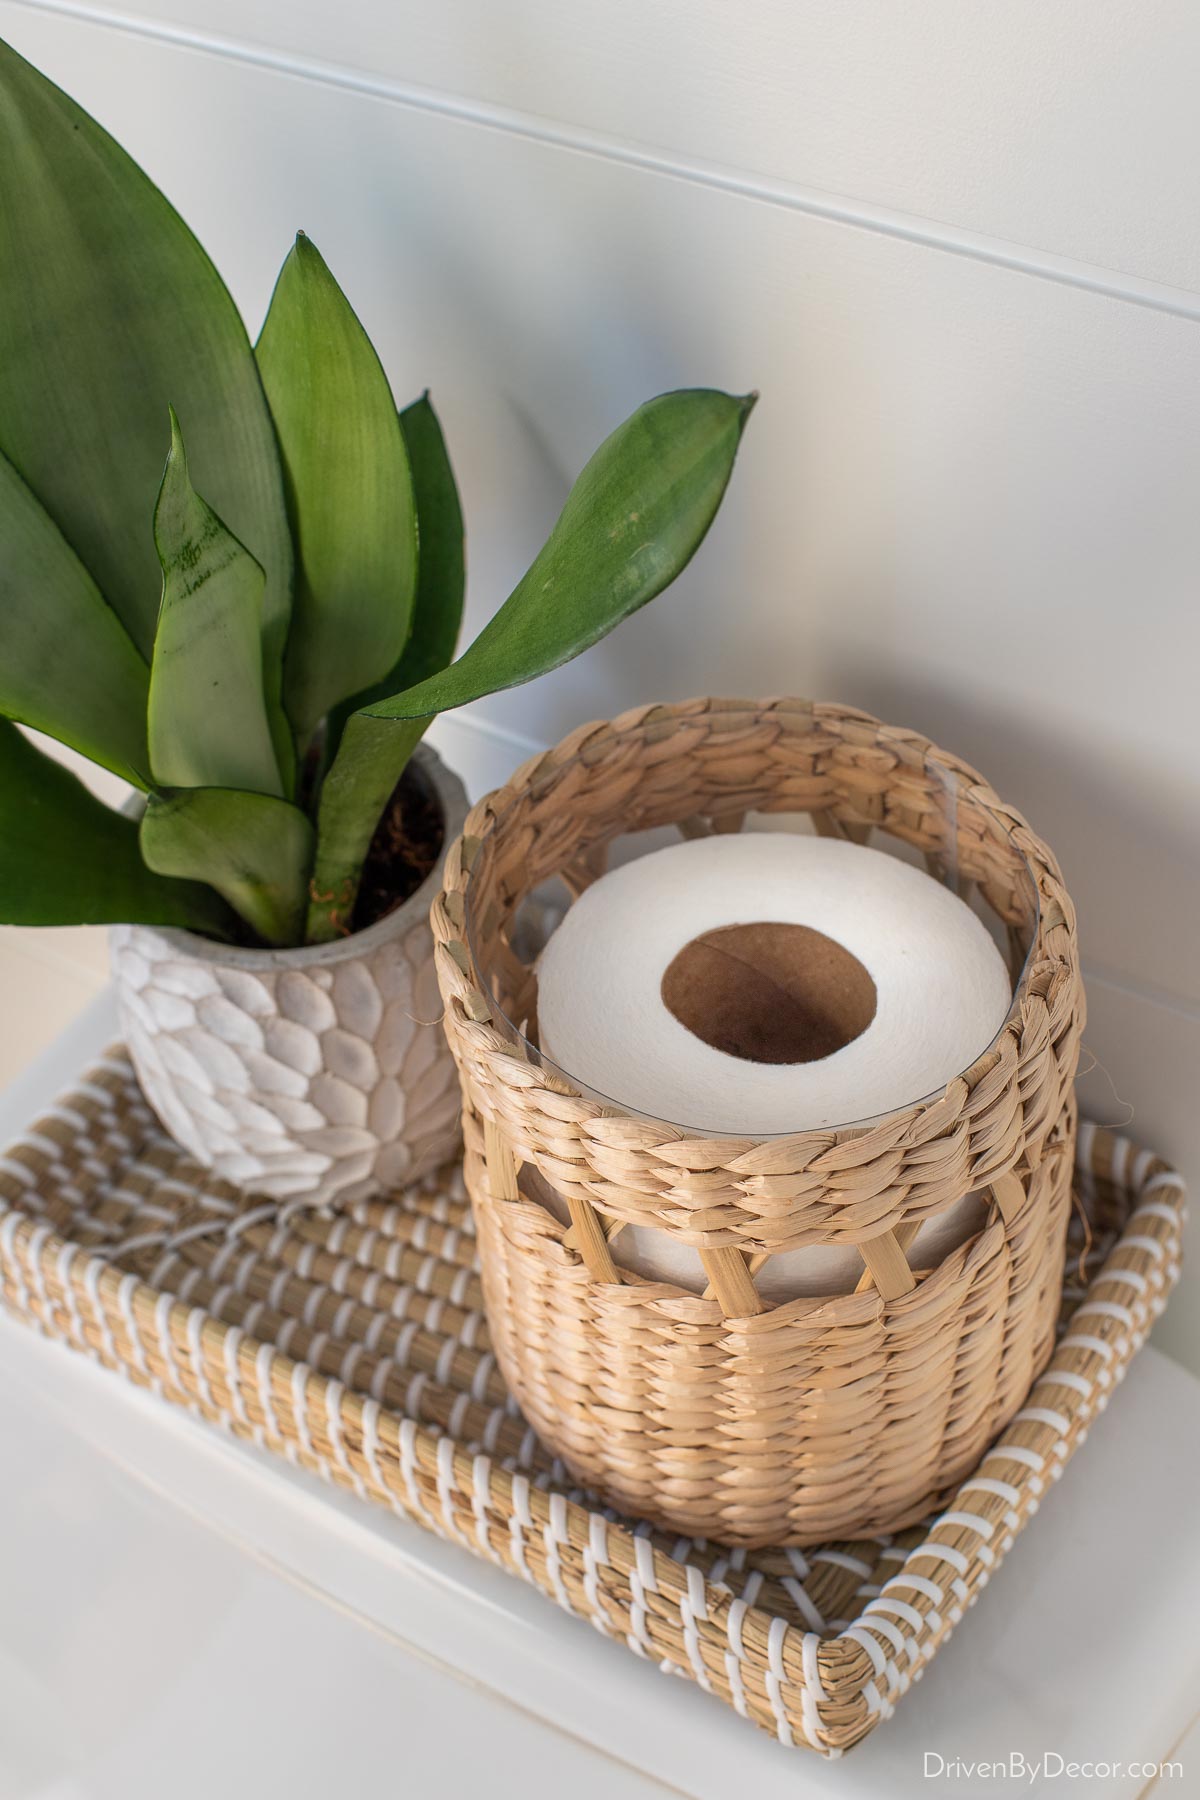 This woven canister is the perfect size for storing an extra roll of toilet paper